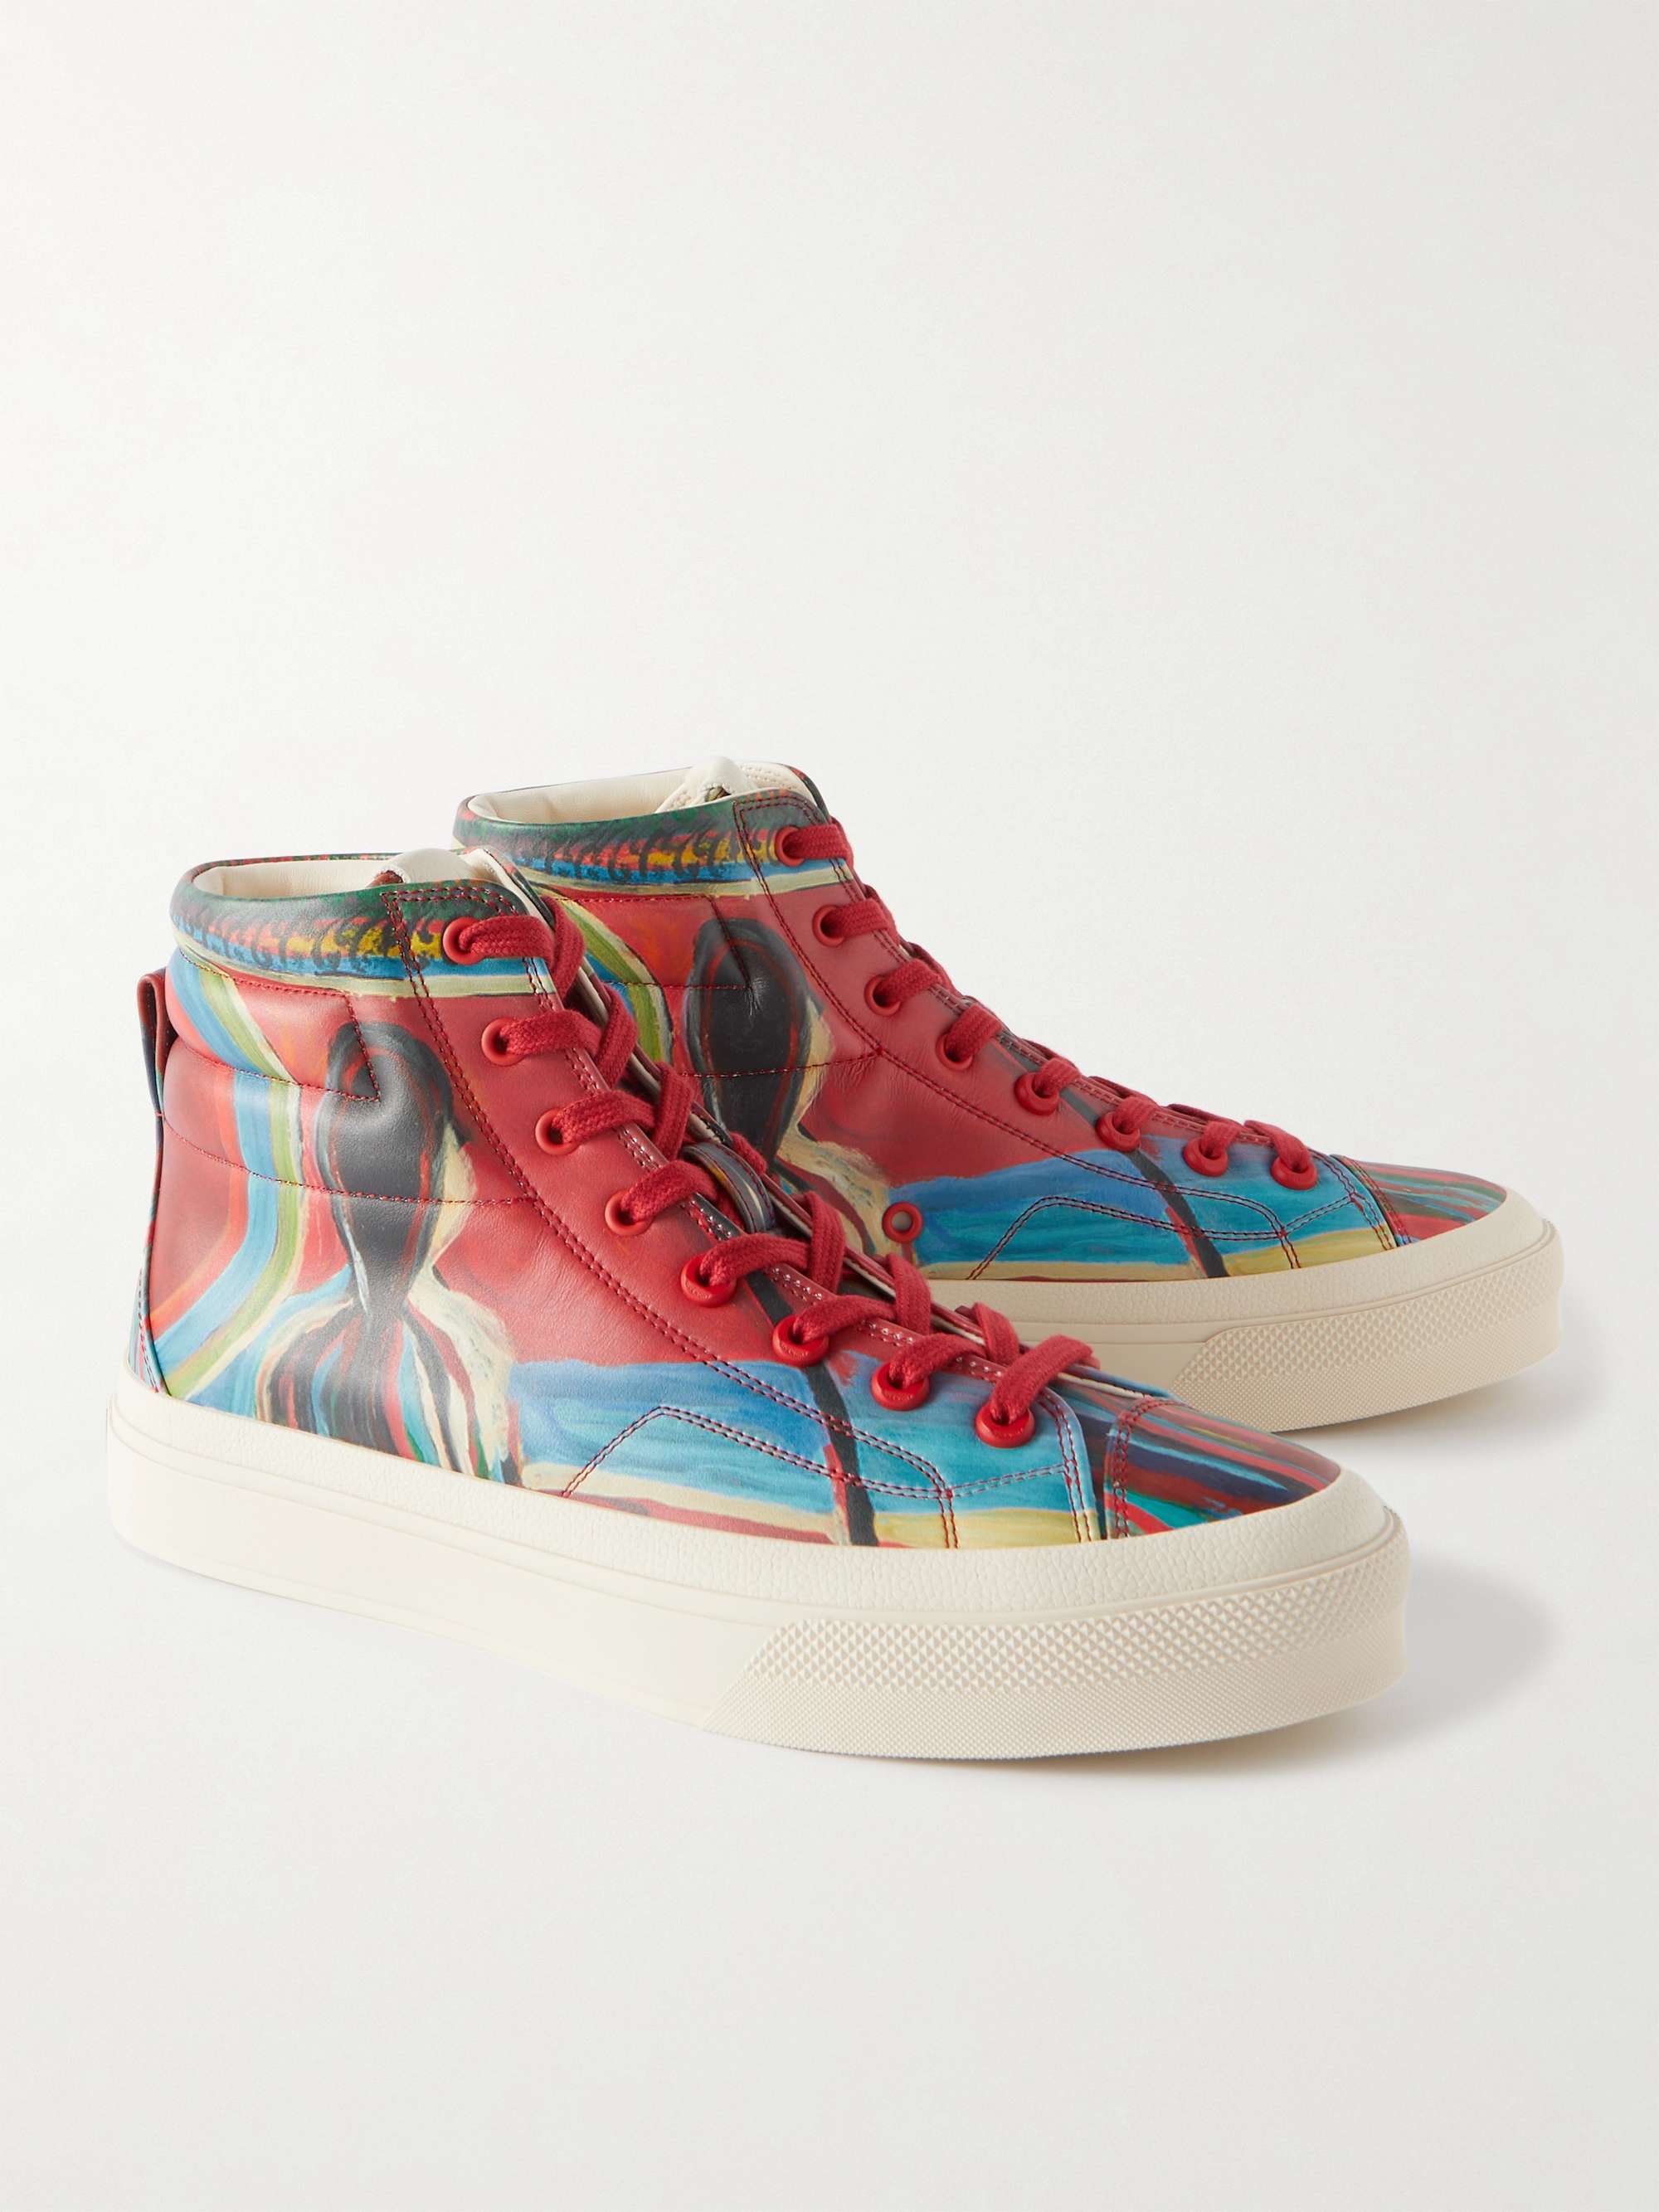 GIVENCHY + Josh Smith Printed Leather High-Top Sneakers | MR PORTER